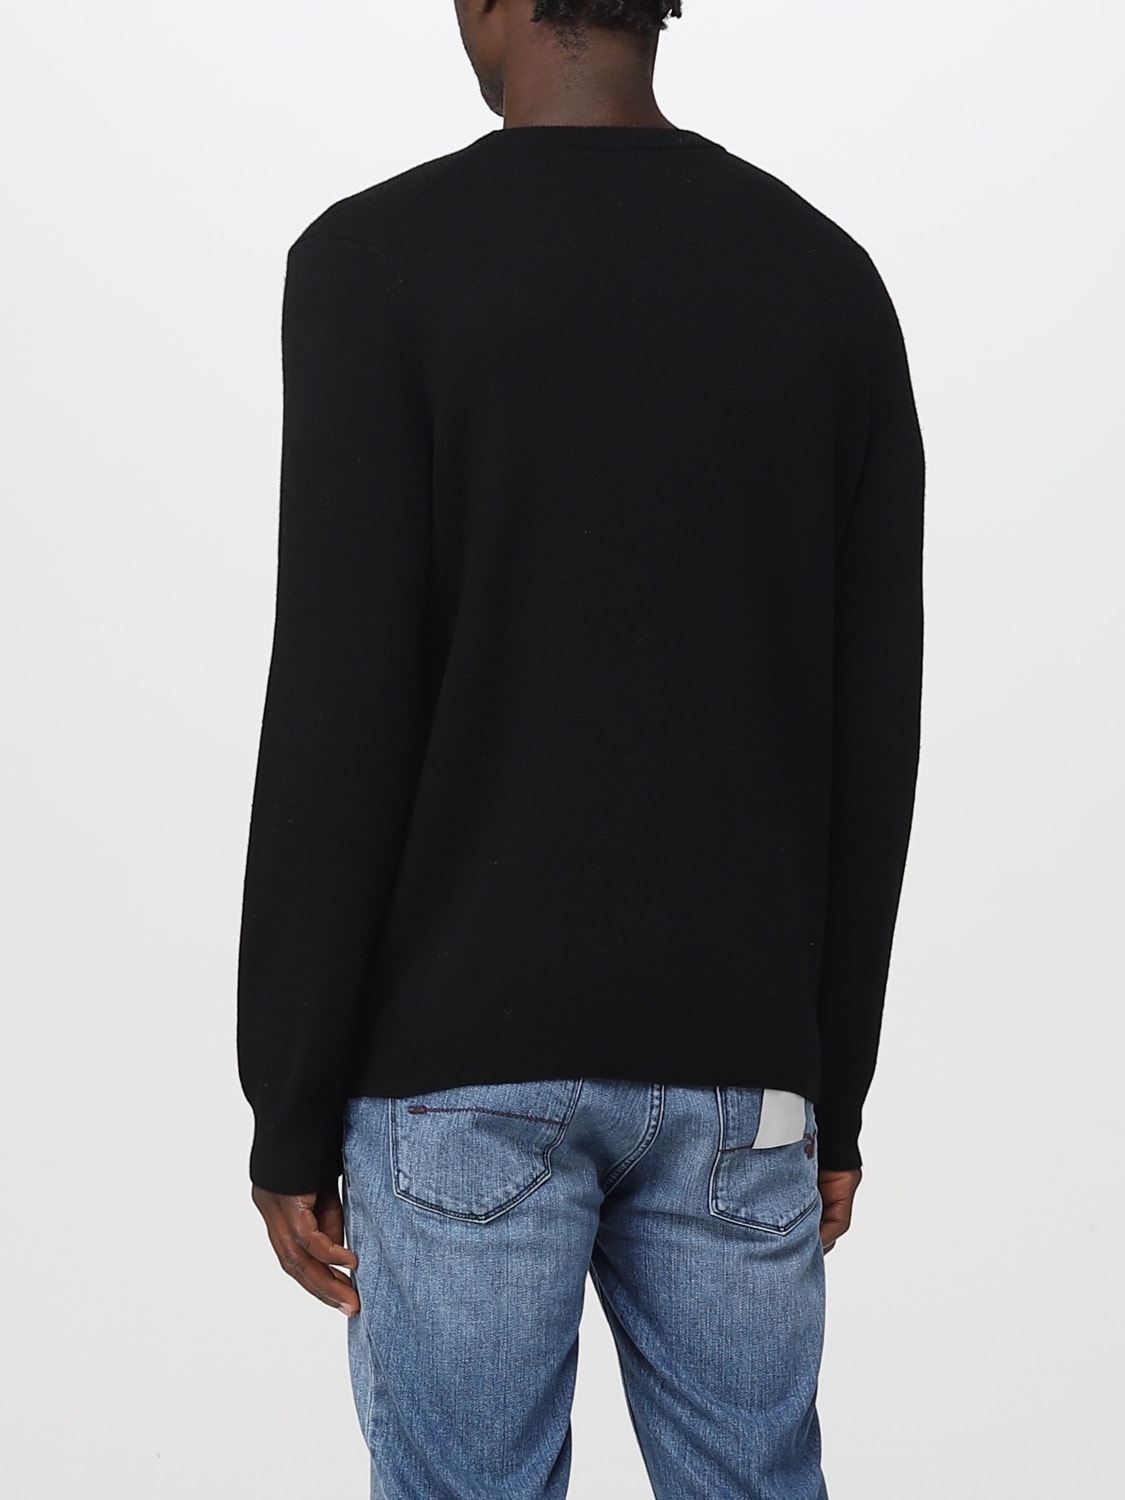 Lacoste Outlet: sweater for man - Black | Lacoste sweater AH3449 online ...